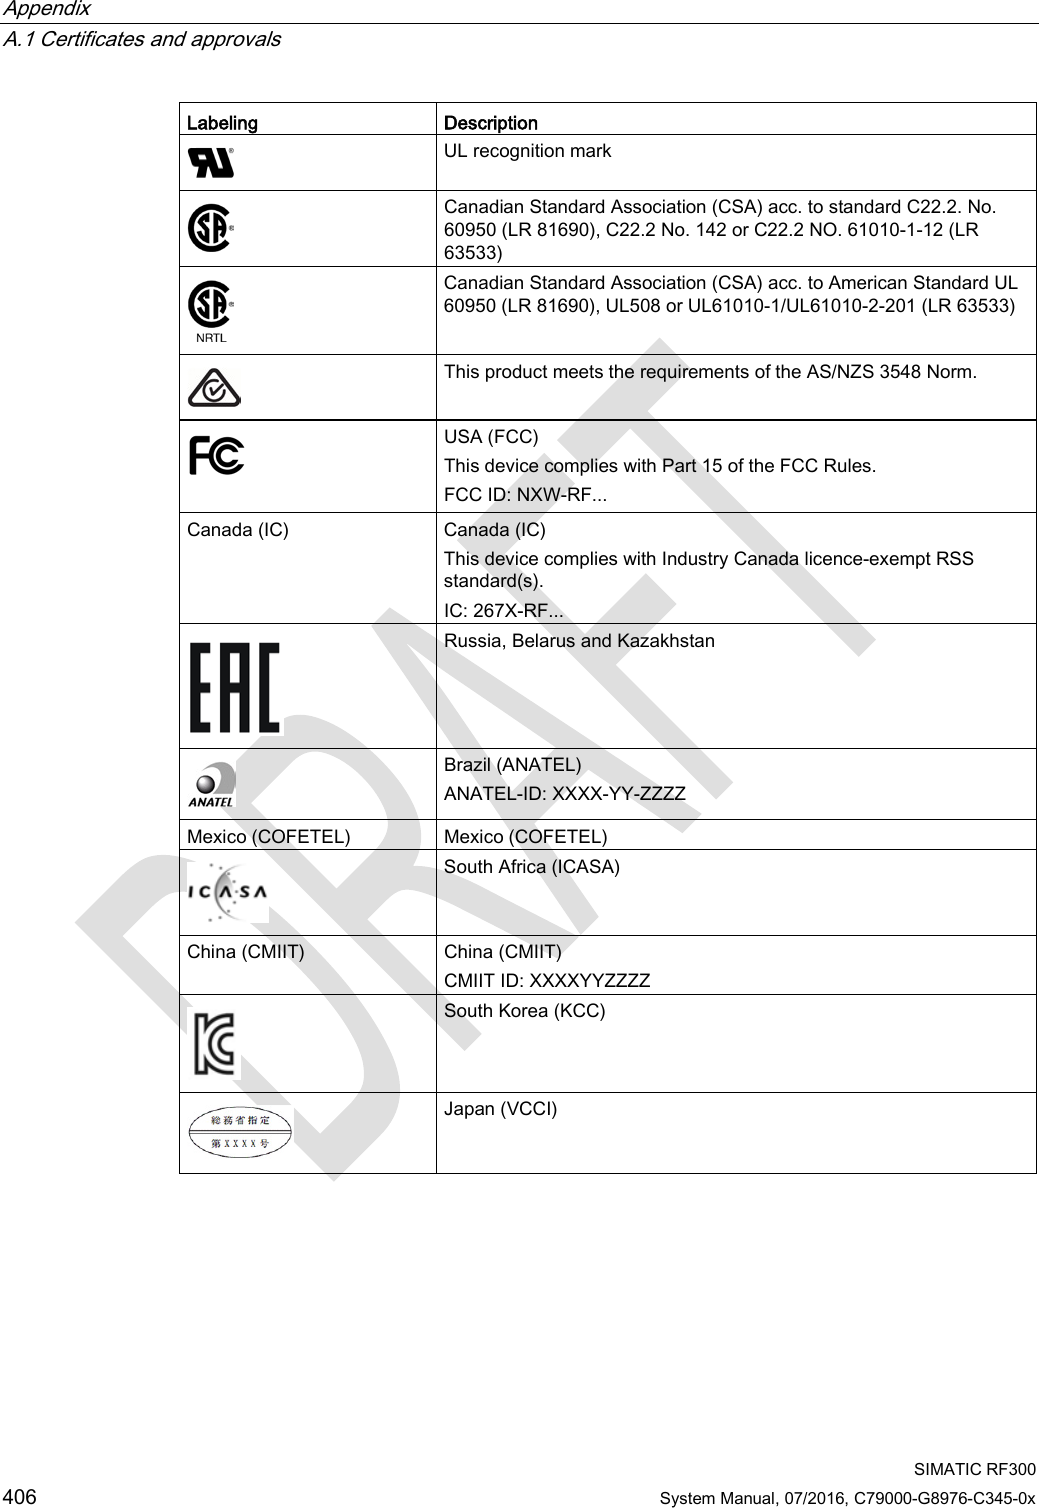 Appendix   A.1 Certificates and approvals  SIMATIC RF300 406 System Manual, 07/2016, C79000-G8976-C345-0x Labeling Description  UL recognition mark  Canadian Standard Association (CSA) acc. to standard C22.2. No. 60950 (LR 81690), C22.2 No. 142 or C22.2 NO. 61010-1-12 (LR 63533)  Canadian Standard Association (CSA) acc. to American Standard UL 60950 (LR 81690), UL508 or UL61010-1/UL61010-2-201 (LR 63533)  This product meets the requirements of the AS/NZS 3548 Norm.   USA (FCC) This device complies with Part 15 of the FCC Rules. FCC ID: NXW-RF... Canada (IC) Canada (IC) This device complies with Industry Canada licence-exempt RSS standard(s). IC: 267X-RF...  Russia, Belarus and Kazakhstan  Brazil (ANATEL) ANATEL-ID: XXXX-YY-ZZZZ Mexico (COFETEL) Mexico (COFETEL)  South Africa (ICASA) China (CMIIT) China (CMIIT) CMIIT ID: XXXXYYZZZZ  South Korea (KCC)  Japan (VCCI) 